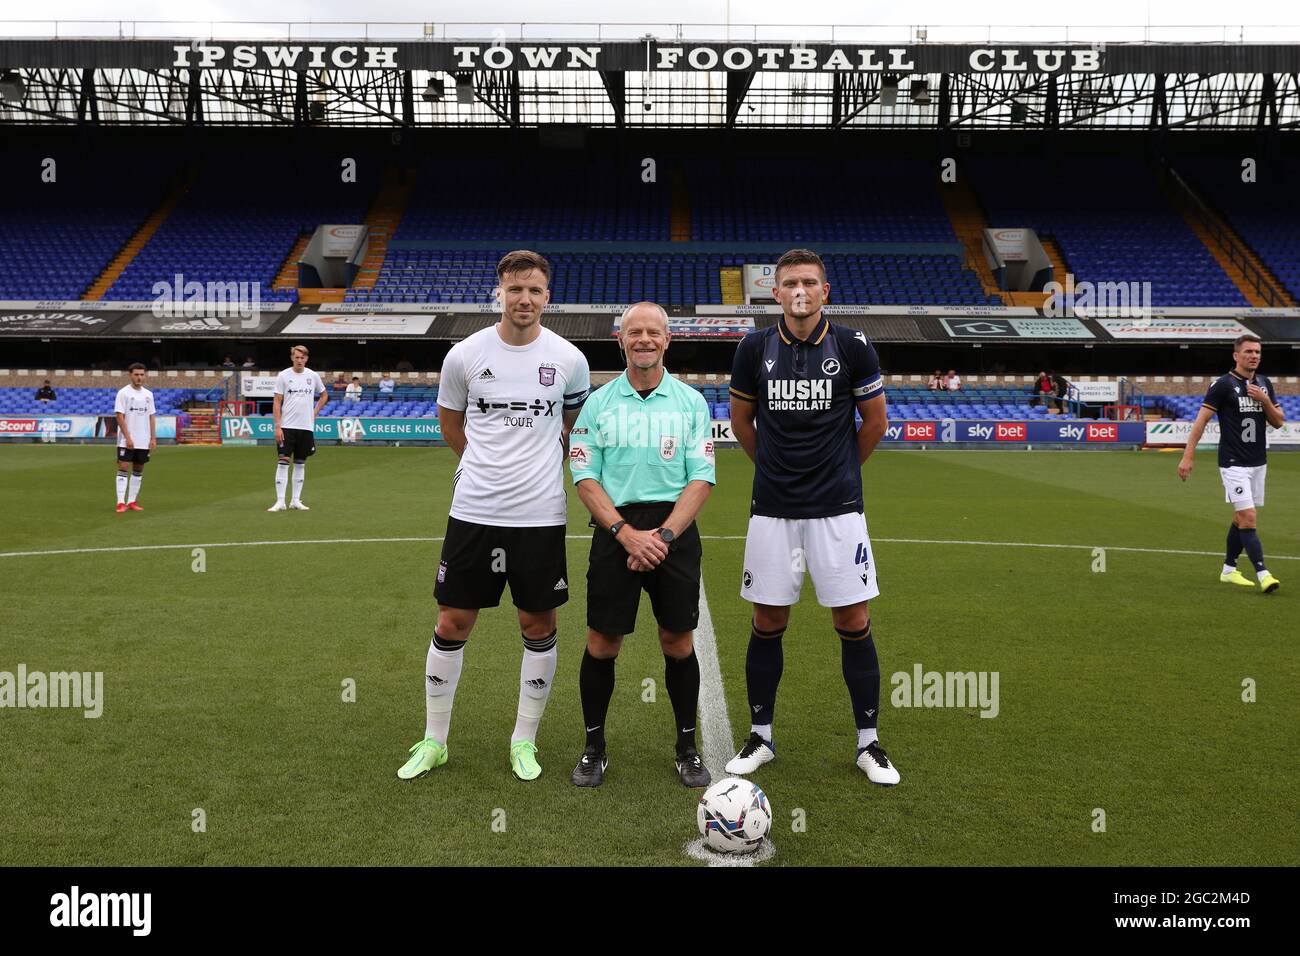 Lee Evans of Ipswich Town and Shaun Hutchinson of Millwall with Referee, Andy Woolmer pre kick off - Ipswich Town v Millwall, Pre-Season Friendly, Portman Road, Ipswich, UK - 31st July 2021 Stock Photo